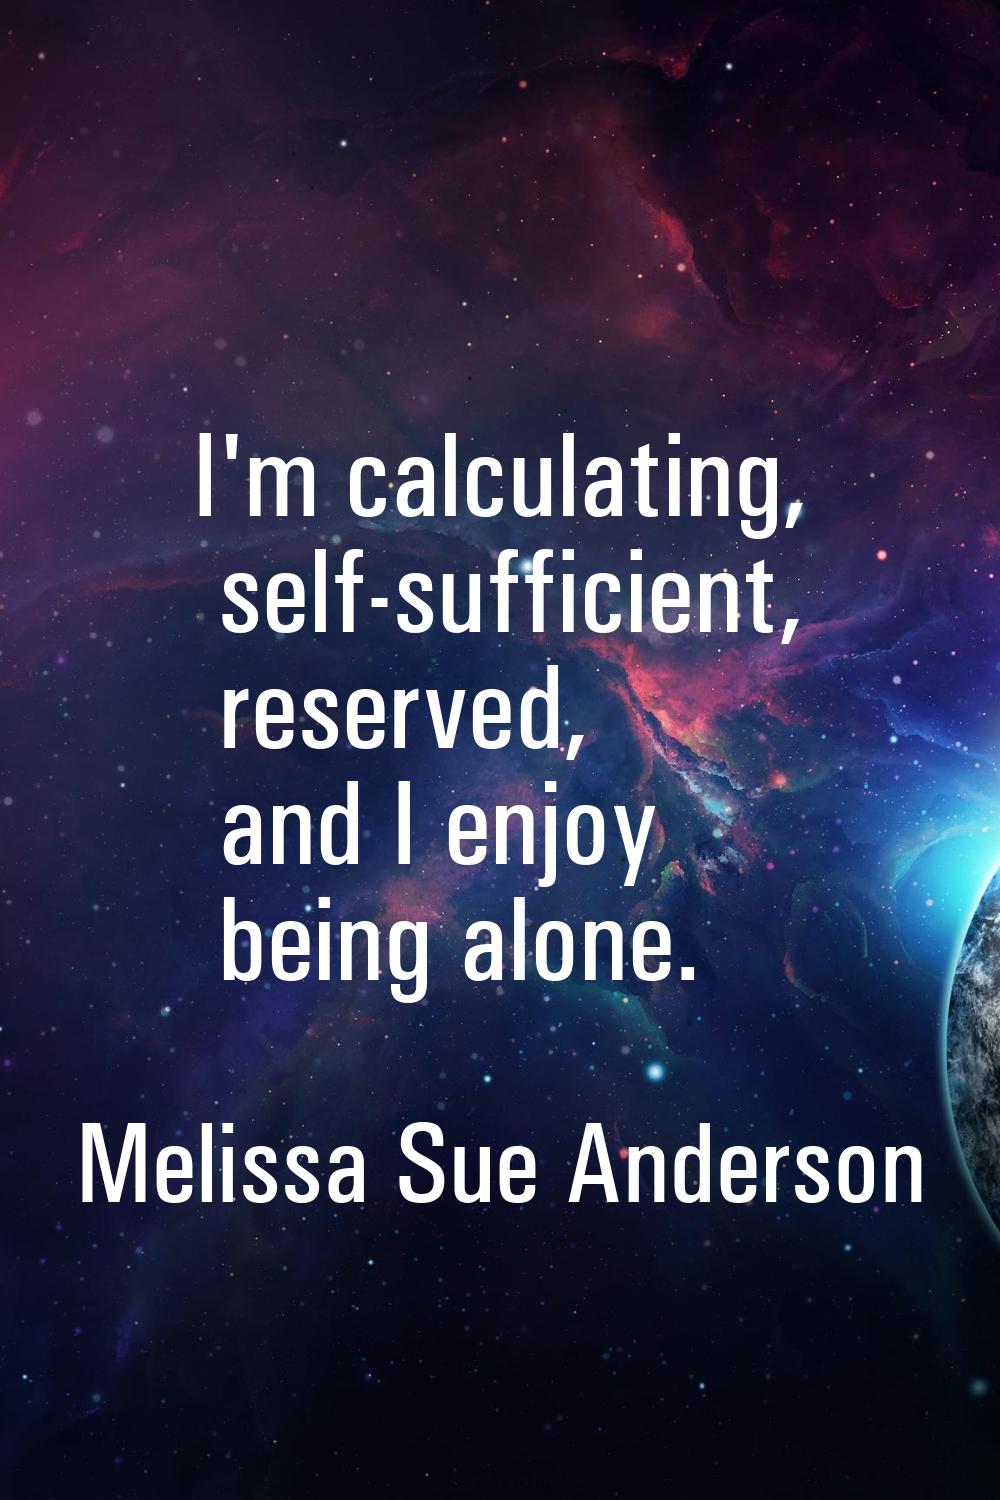 I'm calculating, self-sufficient, reserved, and I enjoy being alone.